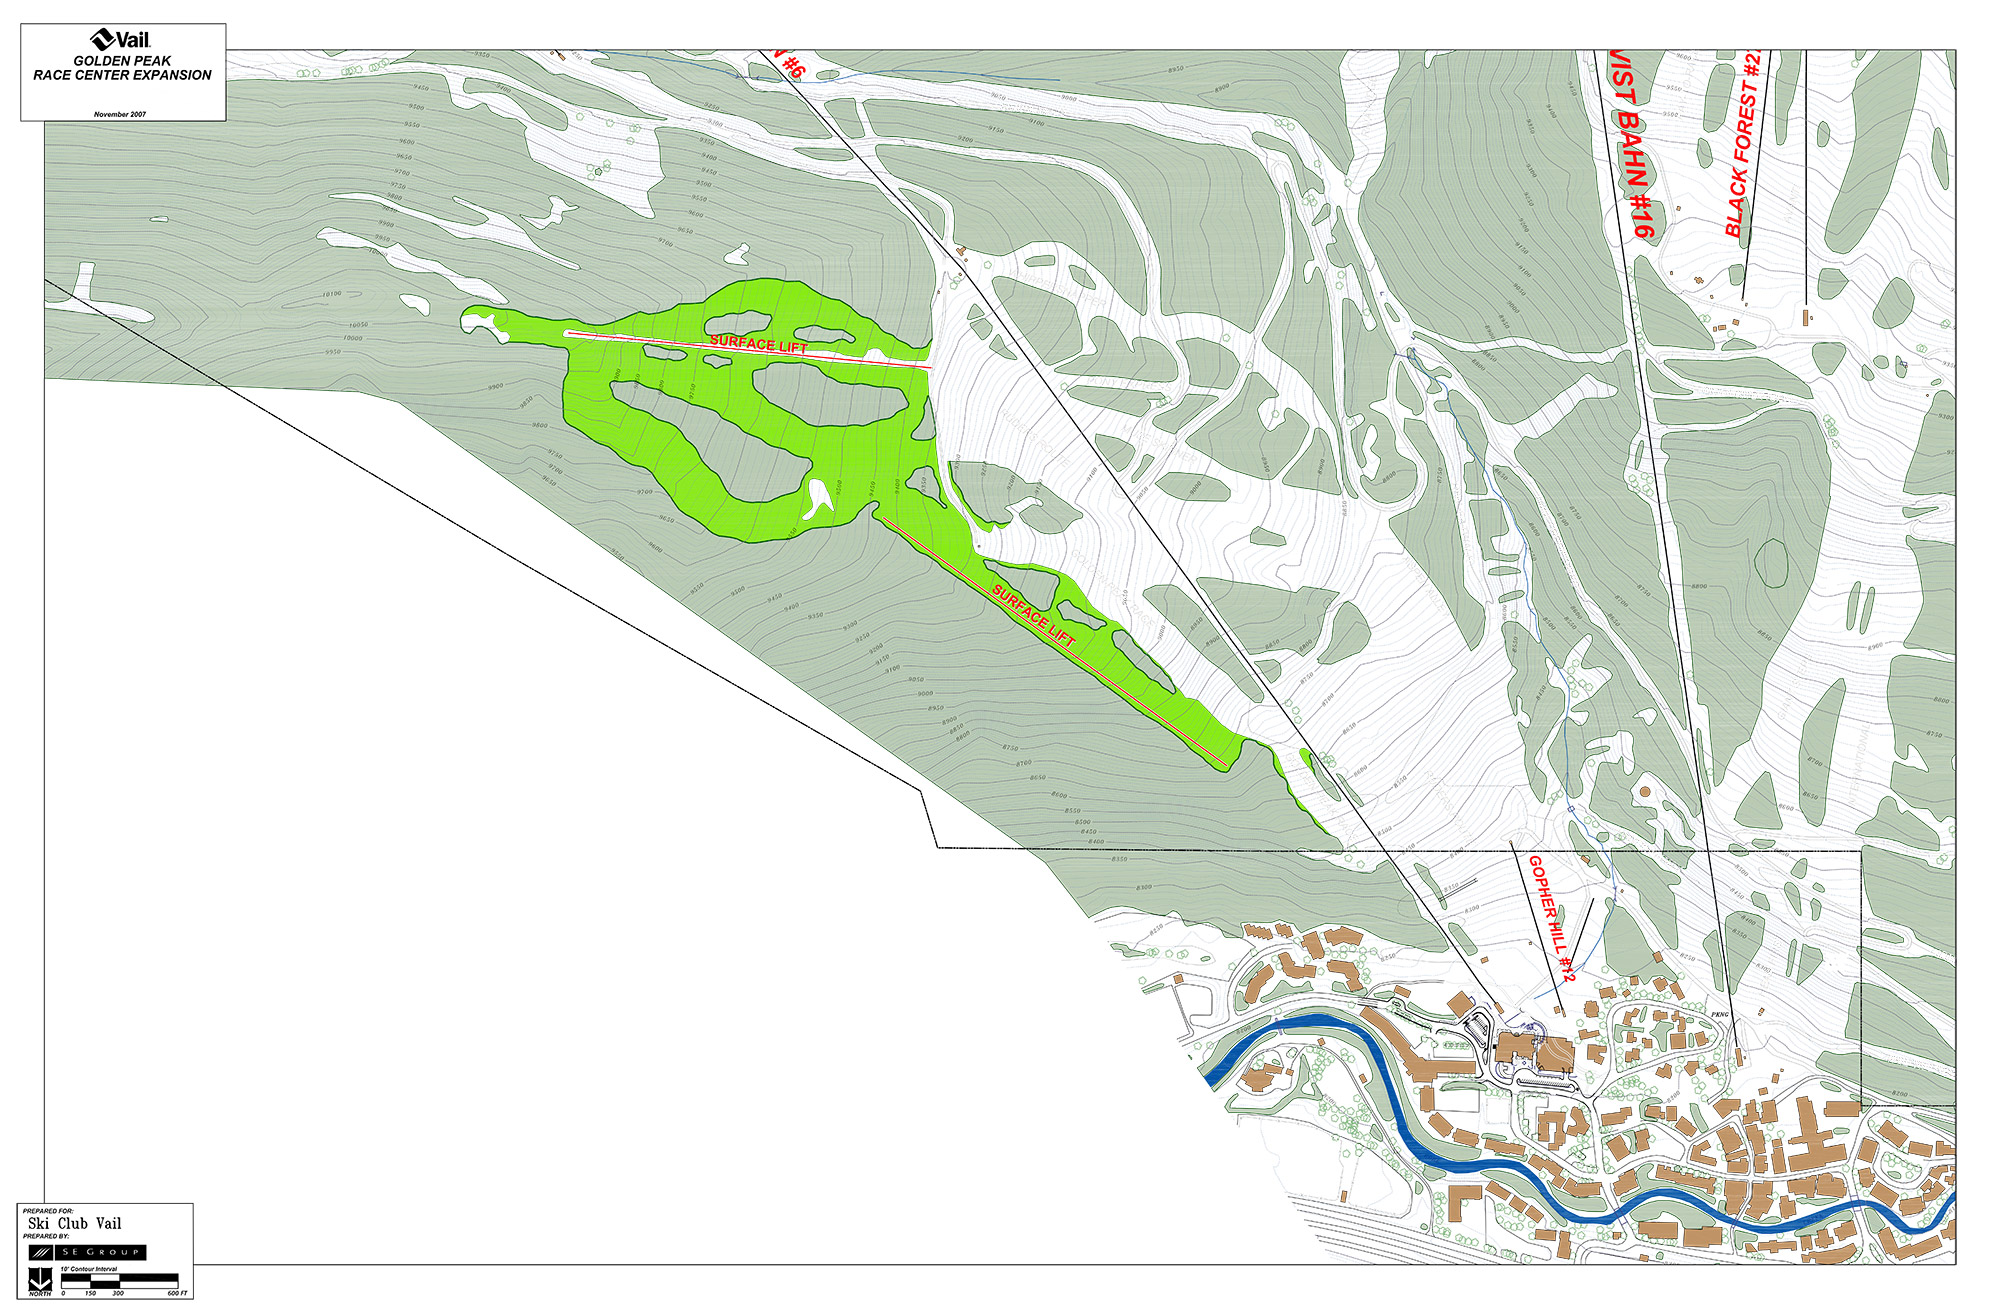 The green area outlines the proposed new trail areas above Golden Peak, which would accommodate speed, tech and freestyle. Two new surface lifts are also shown. Courtesy of SSCV.